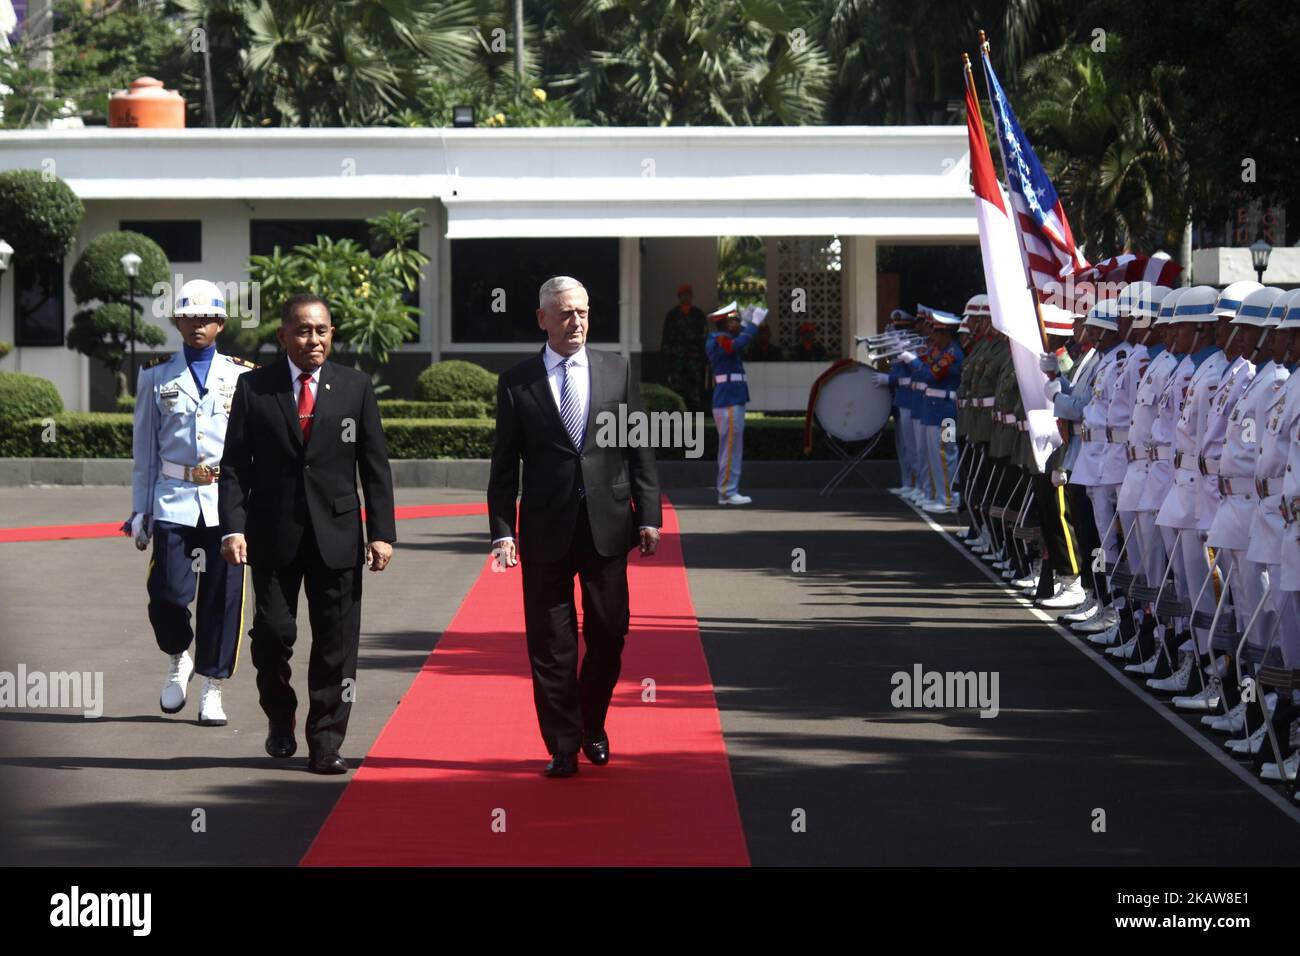 US Defense Secretary James Mattis was accompanied by Indonesia's Defense Minister to inspect troops at a welcoming ceremony at the Defense Ministry building, Jakarta, January 23, 2018. The visit of US Defense Minister James Mattis as an effort to strengthen bilateral defense relations between the two countries , and to discuss defense cooperation. (Photo by Aditya Irawan/NurPhoto) Stock Photo